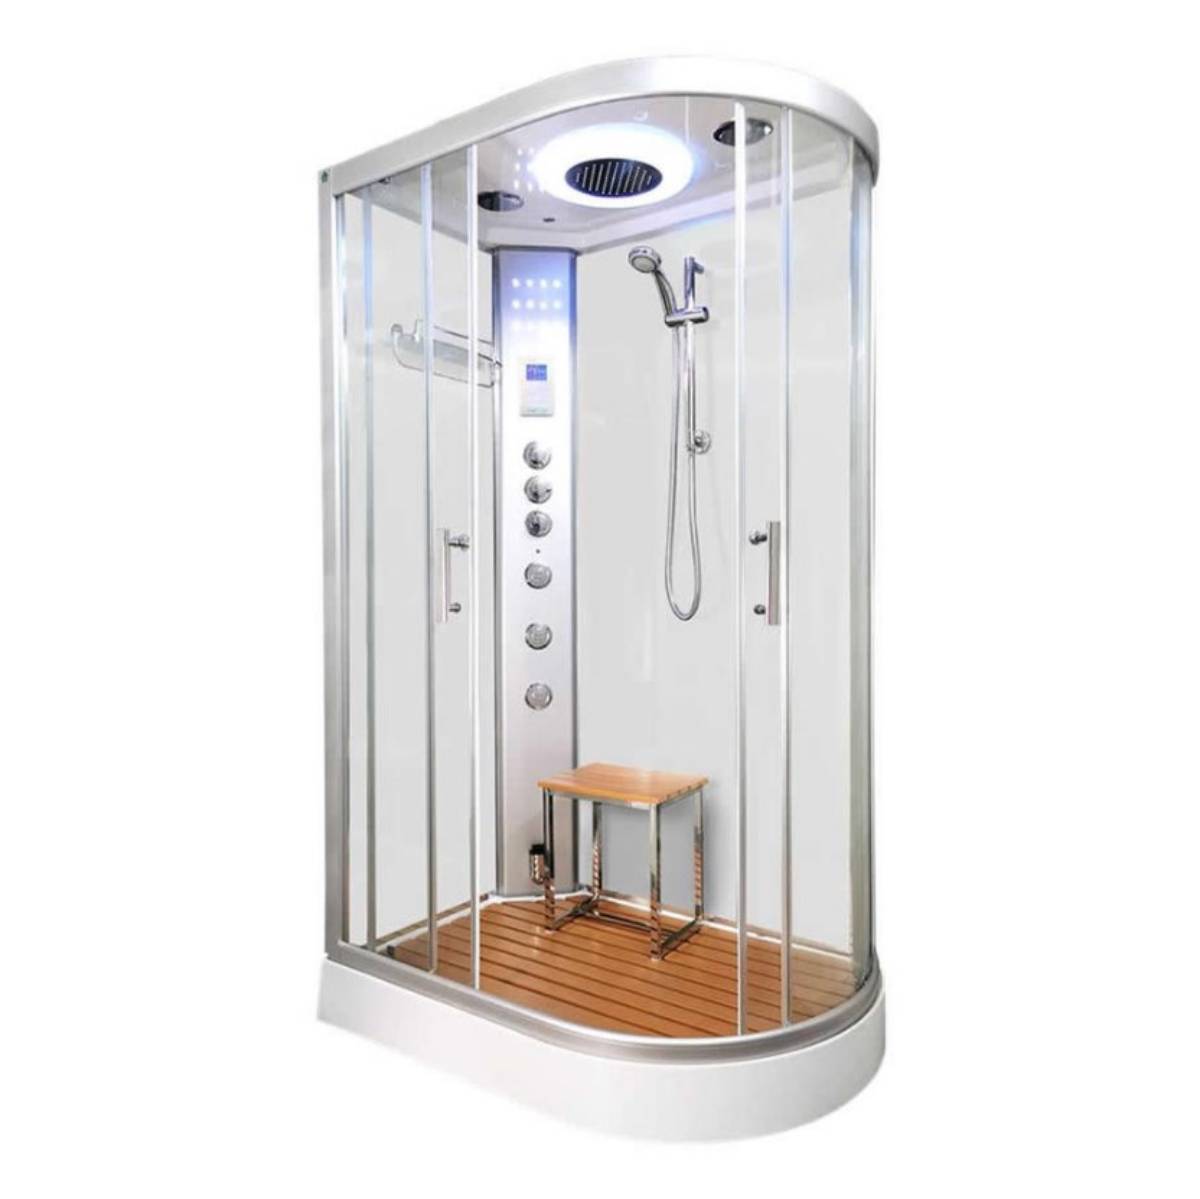 Vidalux Clearwater 1200mm Steam Shower Enclosure Left Hand - White (11495)